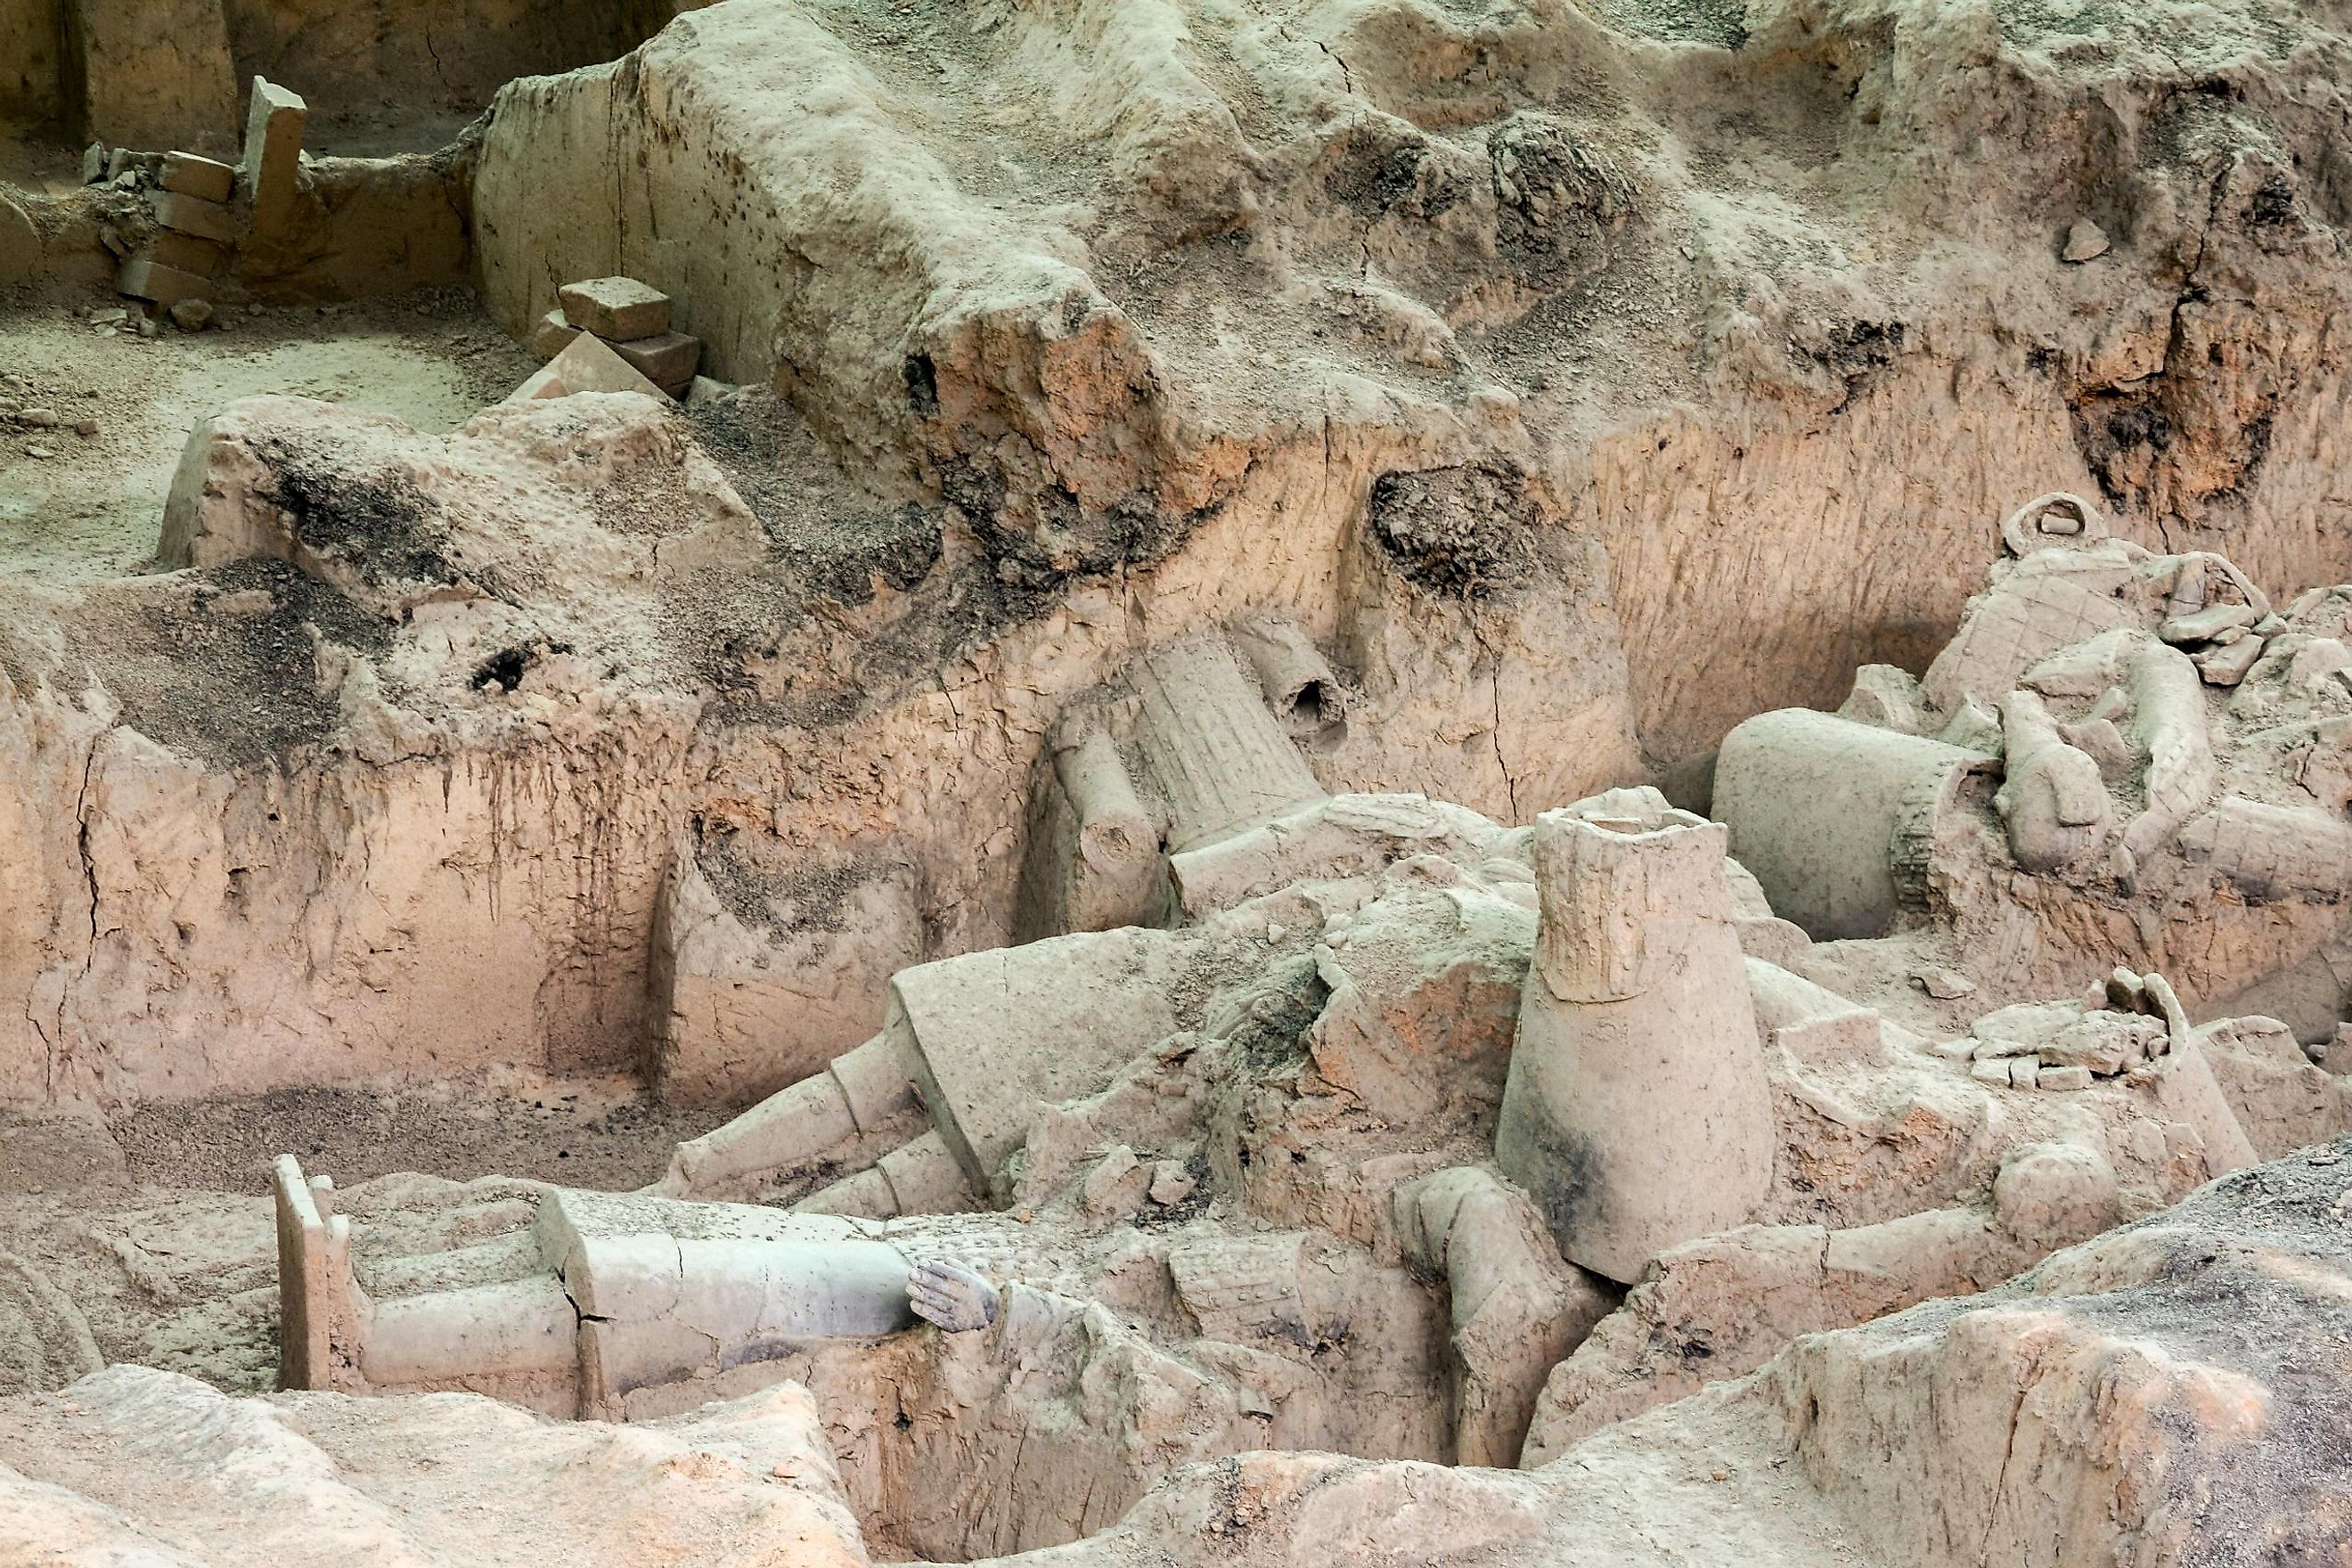 Terra Cotta Warriors in their original state when unearthed in Qin Shi Huang Emperor's tomb of 210-209 BC. - YueStock / Shutterstock.com